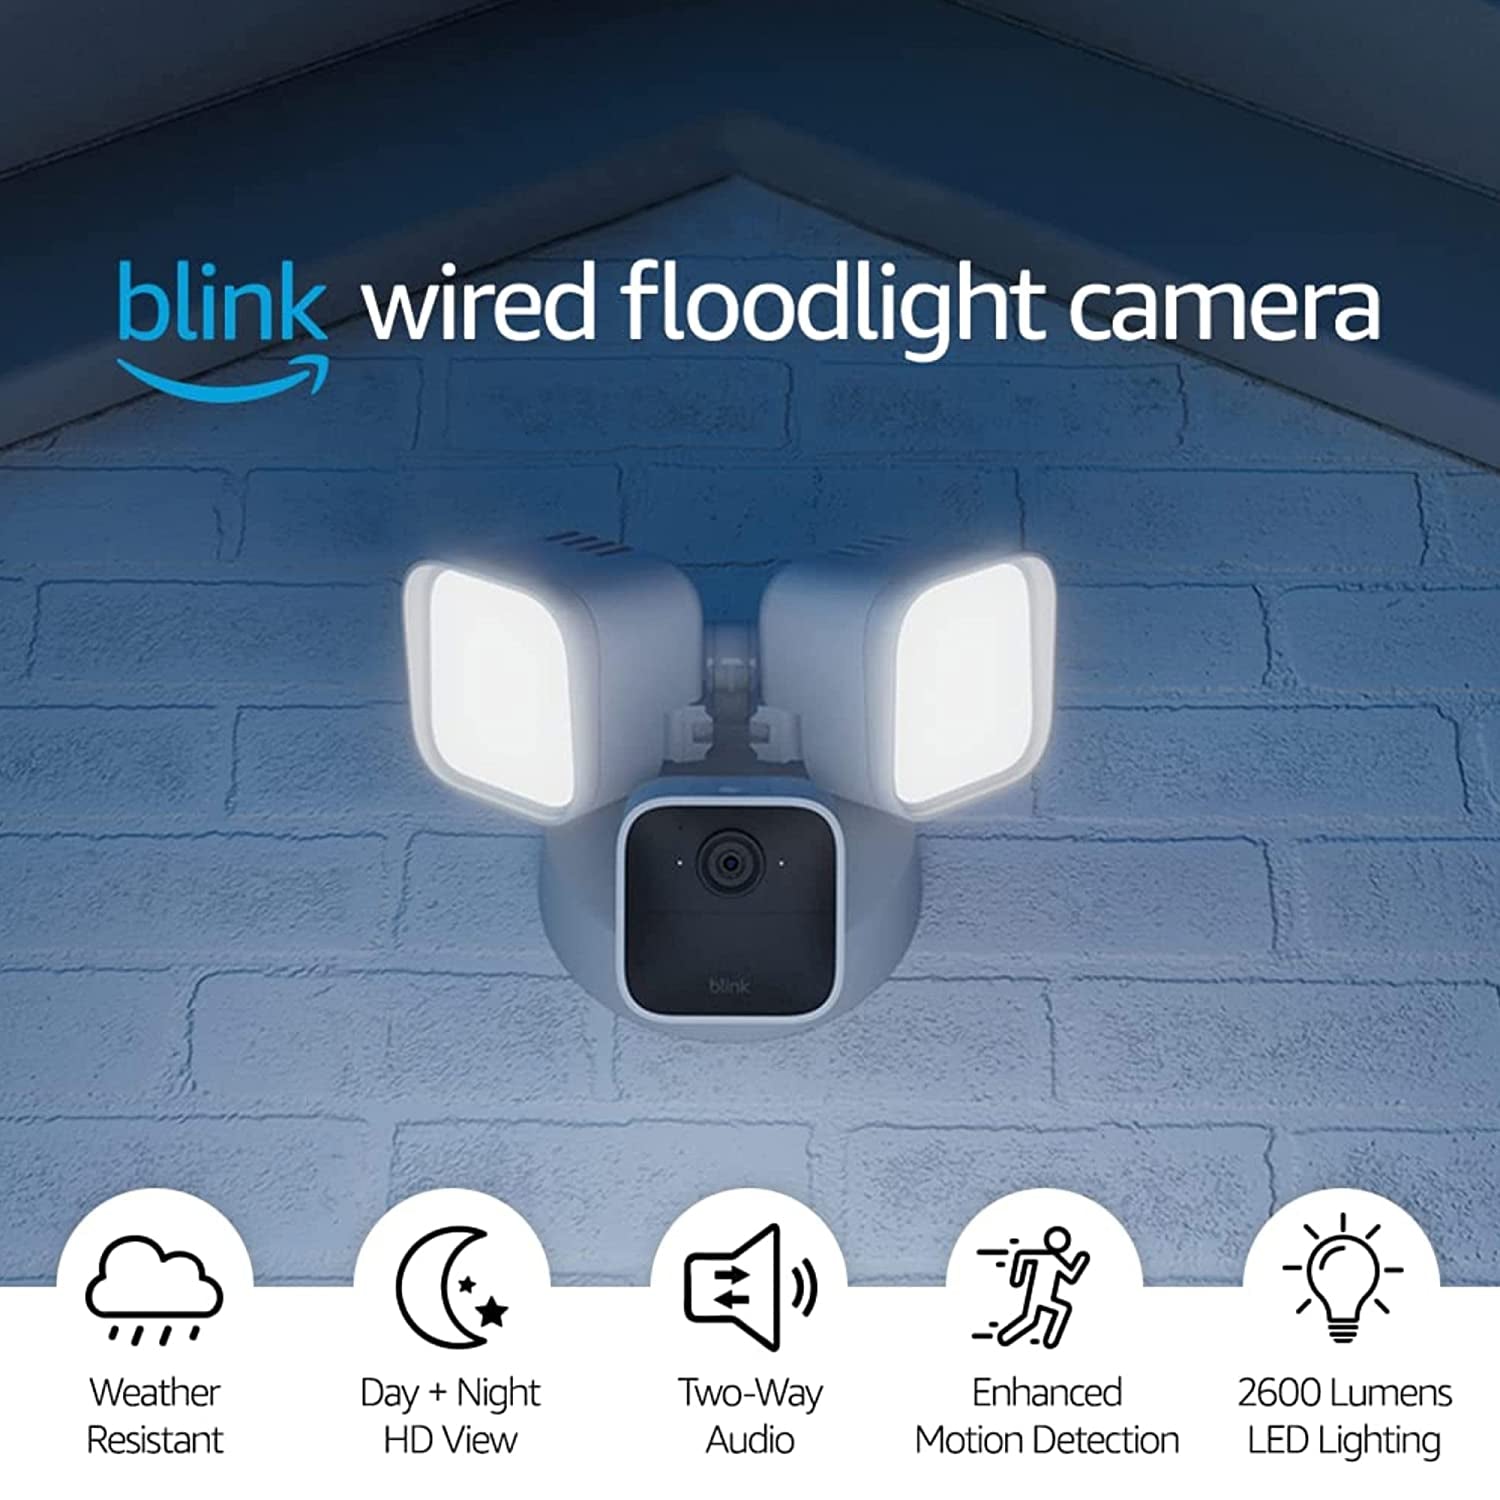 Wired Floodlight Camera – Smart Security Camera, 2600 Lumens, HD Live View, Enhanced Motion Detection, Built-In Siren, Works with Alexa – 1 Camera (White)